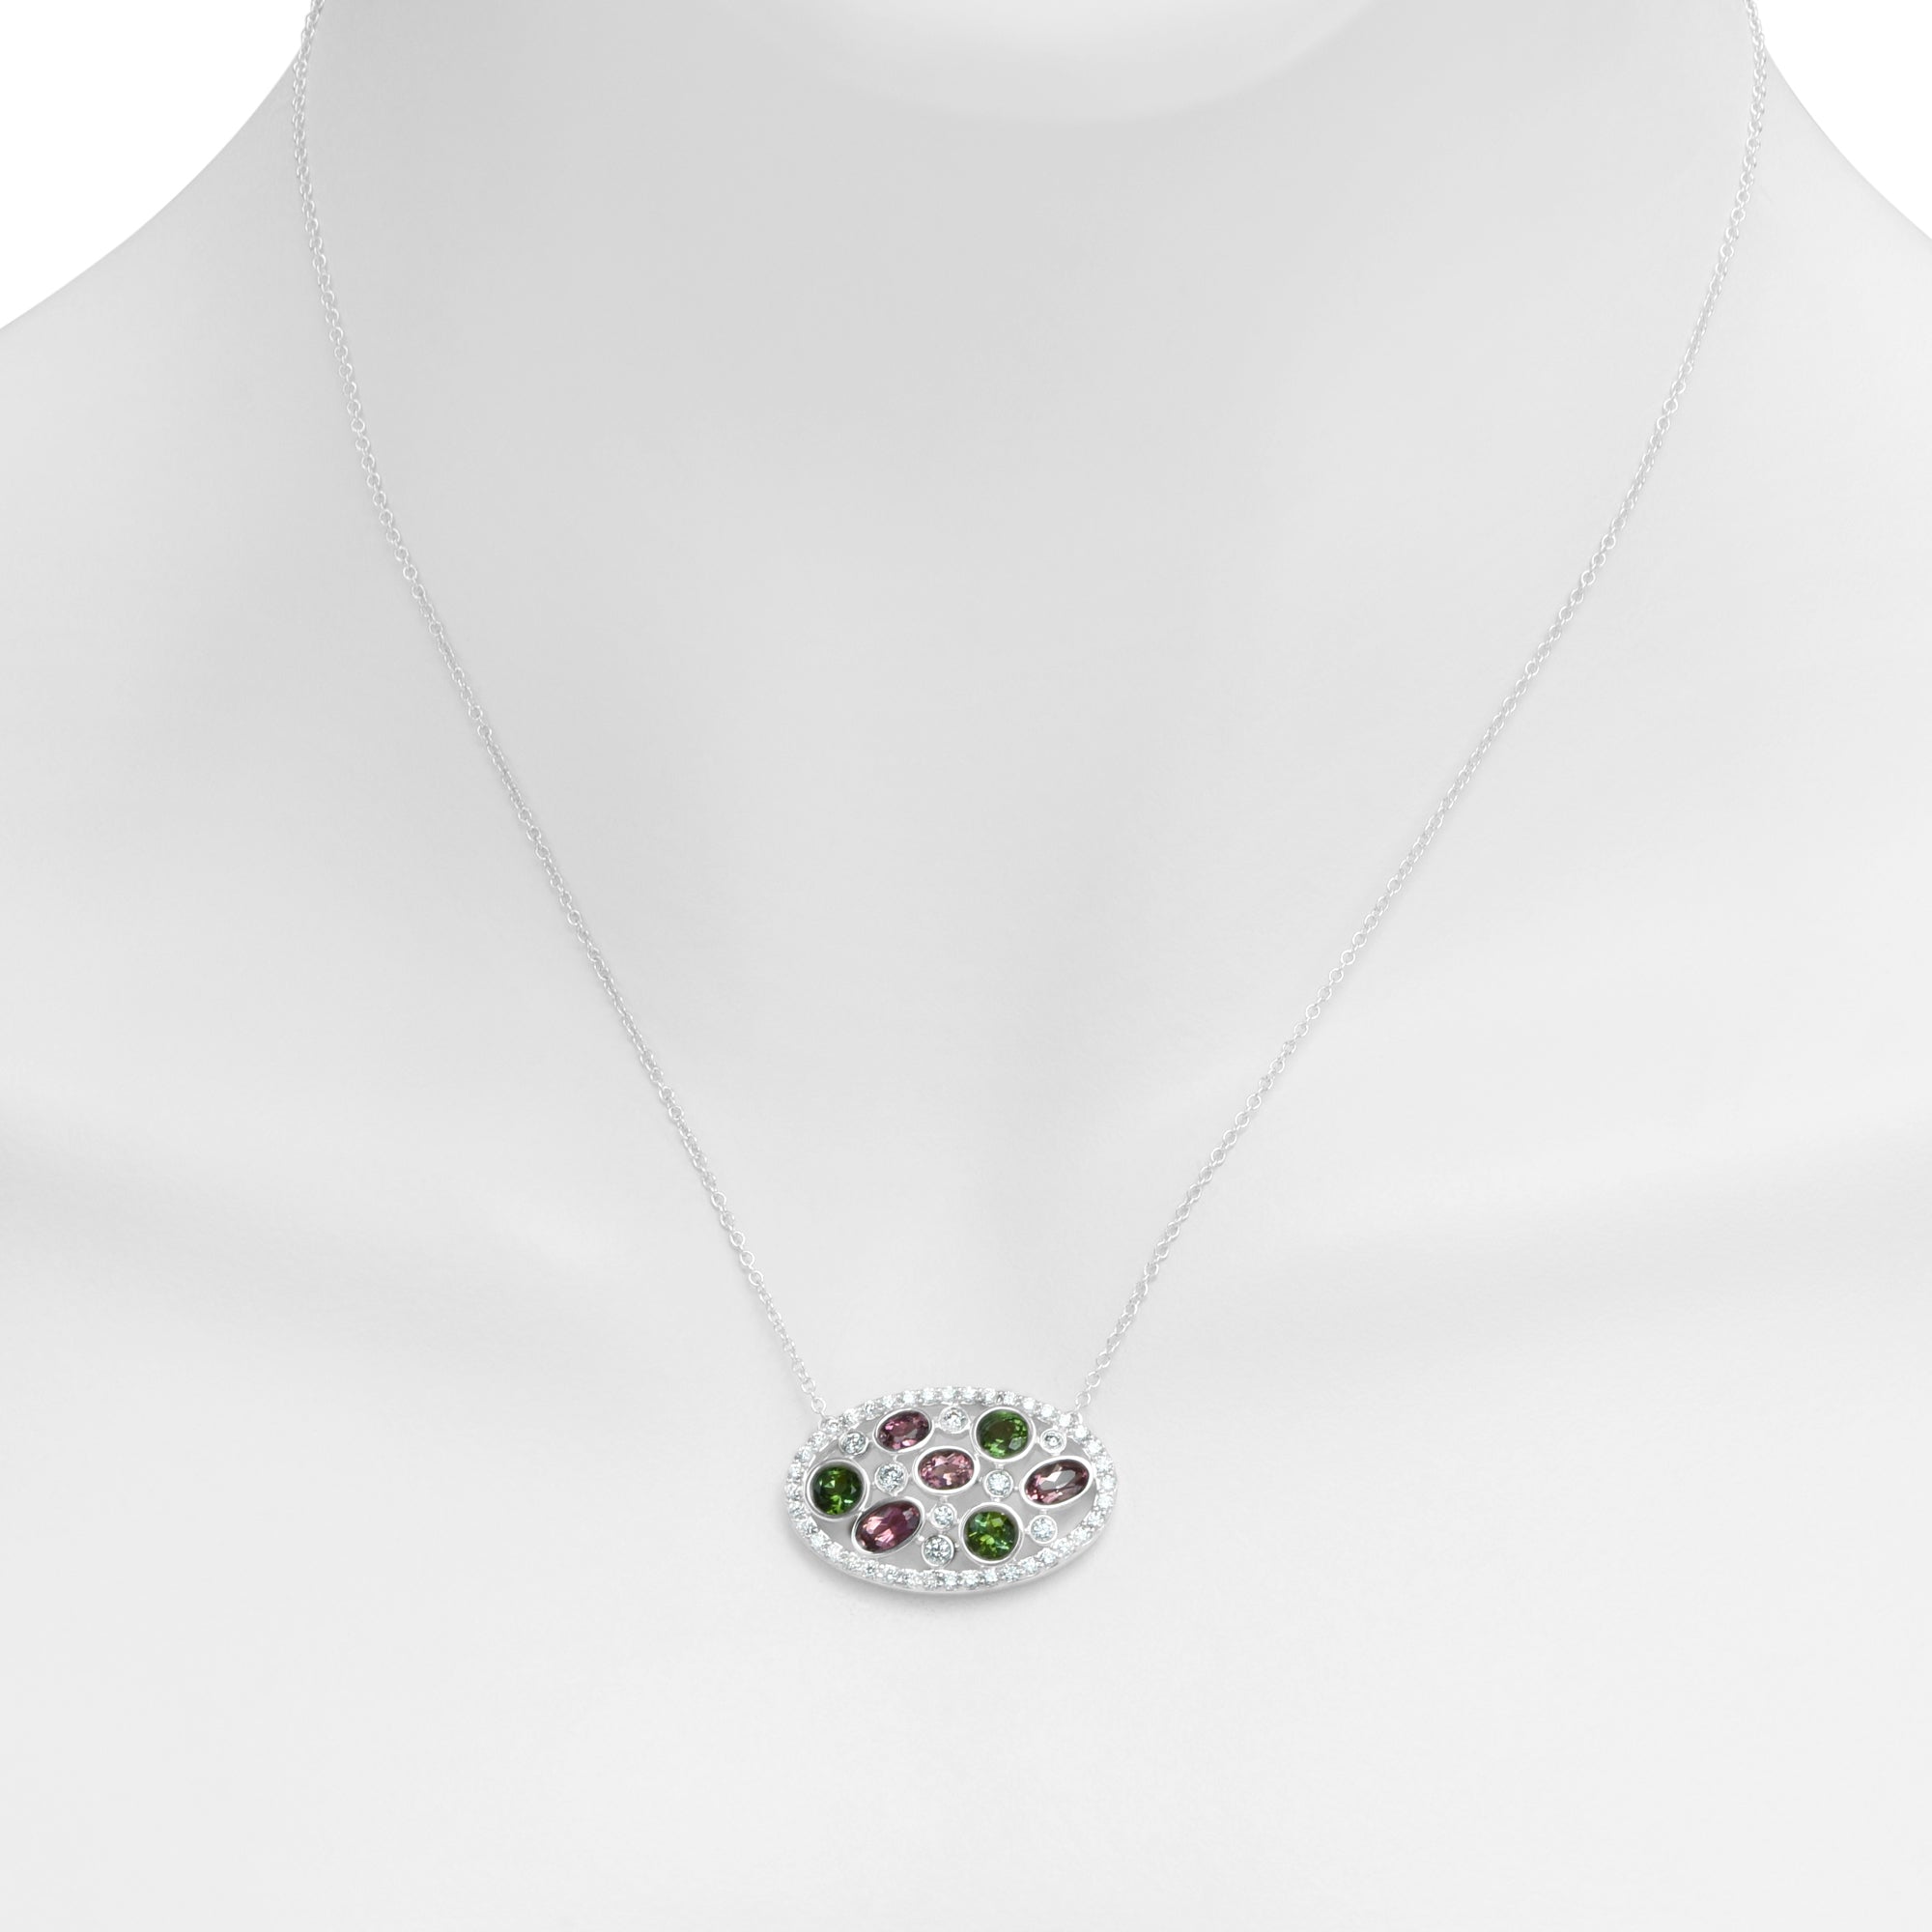 Maine Pink and Green Tourmaline Merchants Row Necklace in 14kt White Gold with Diamonds (5/8ct tw)